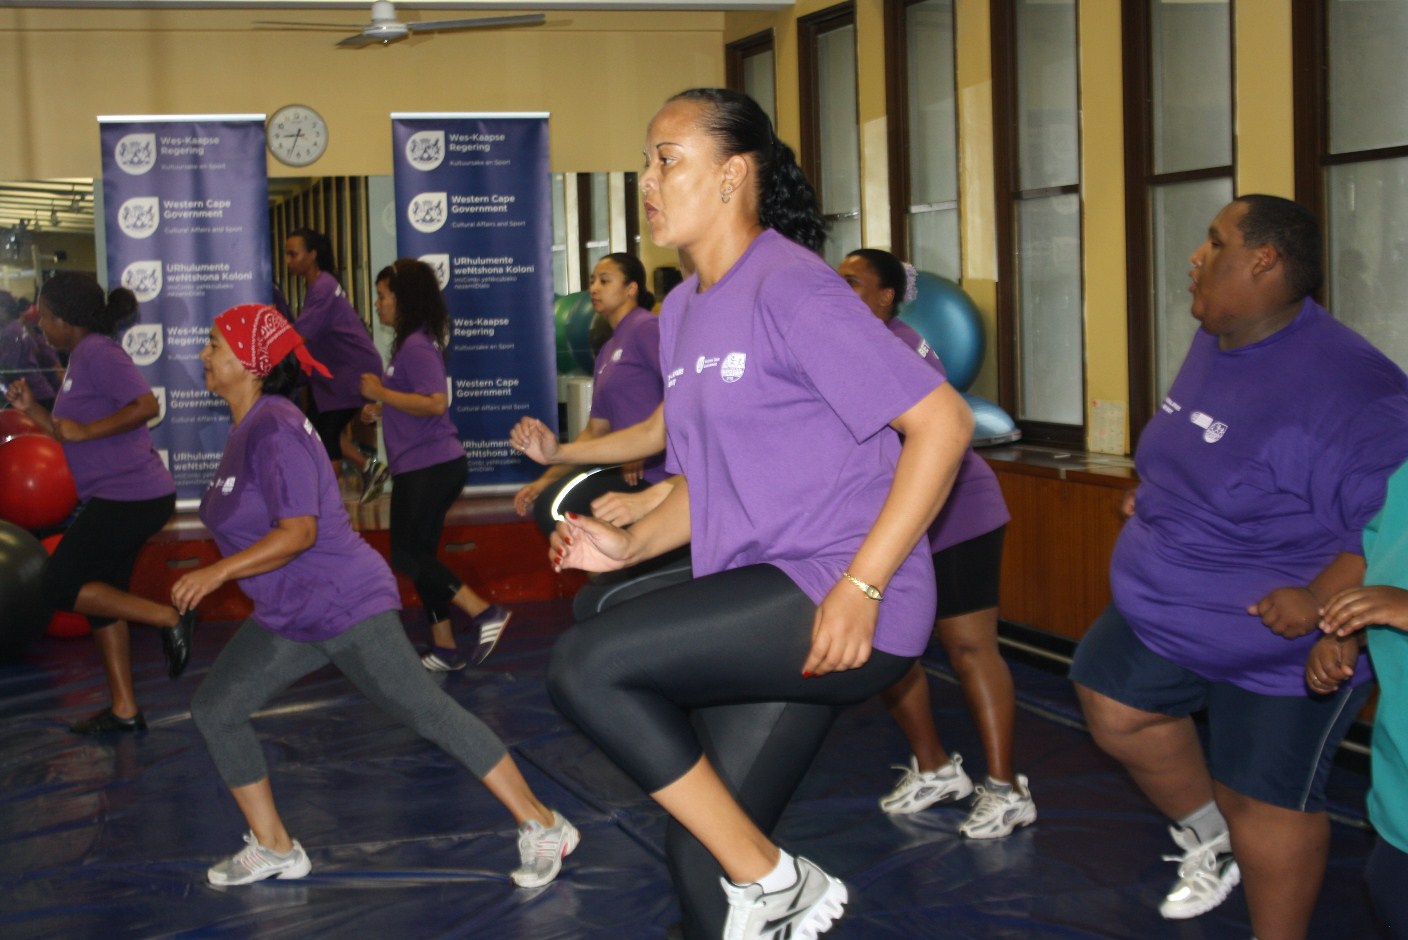 The group performs aerobics to improve their lifestyles.